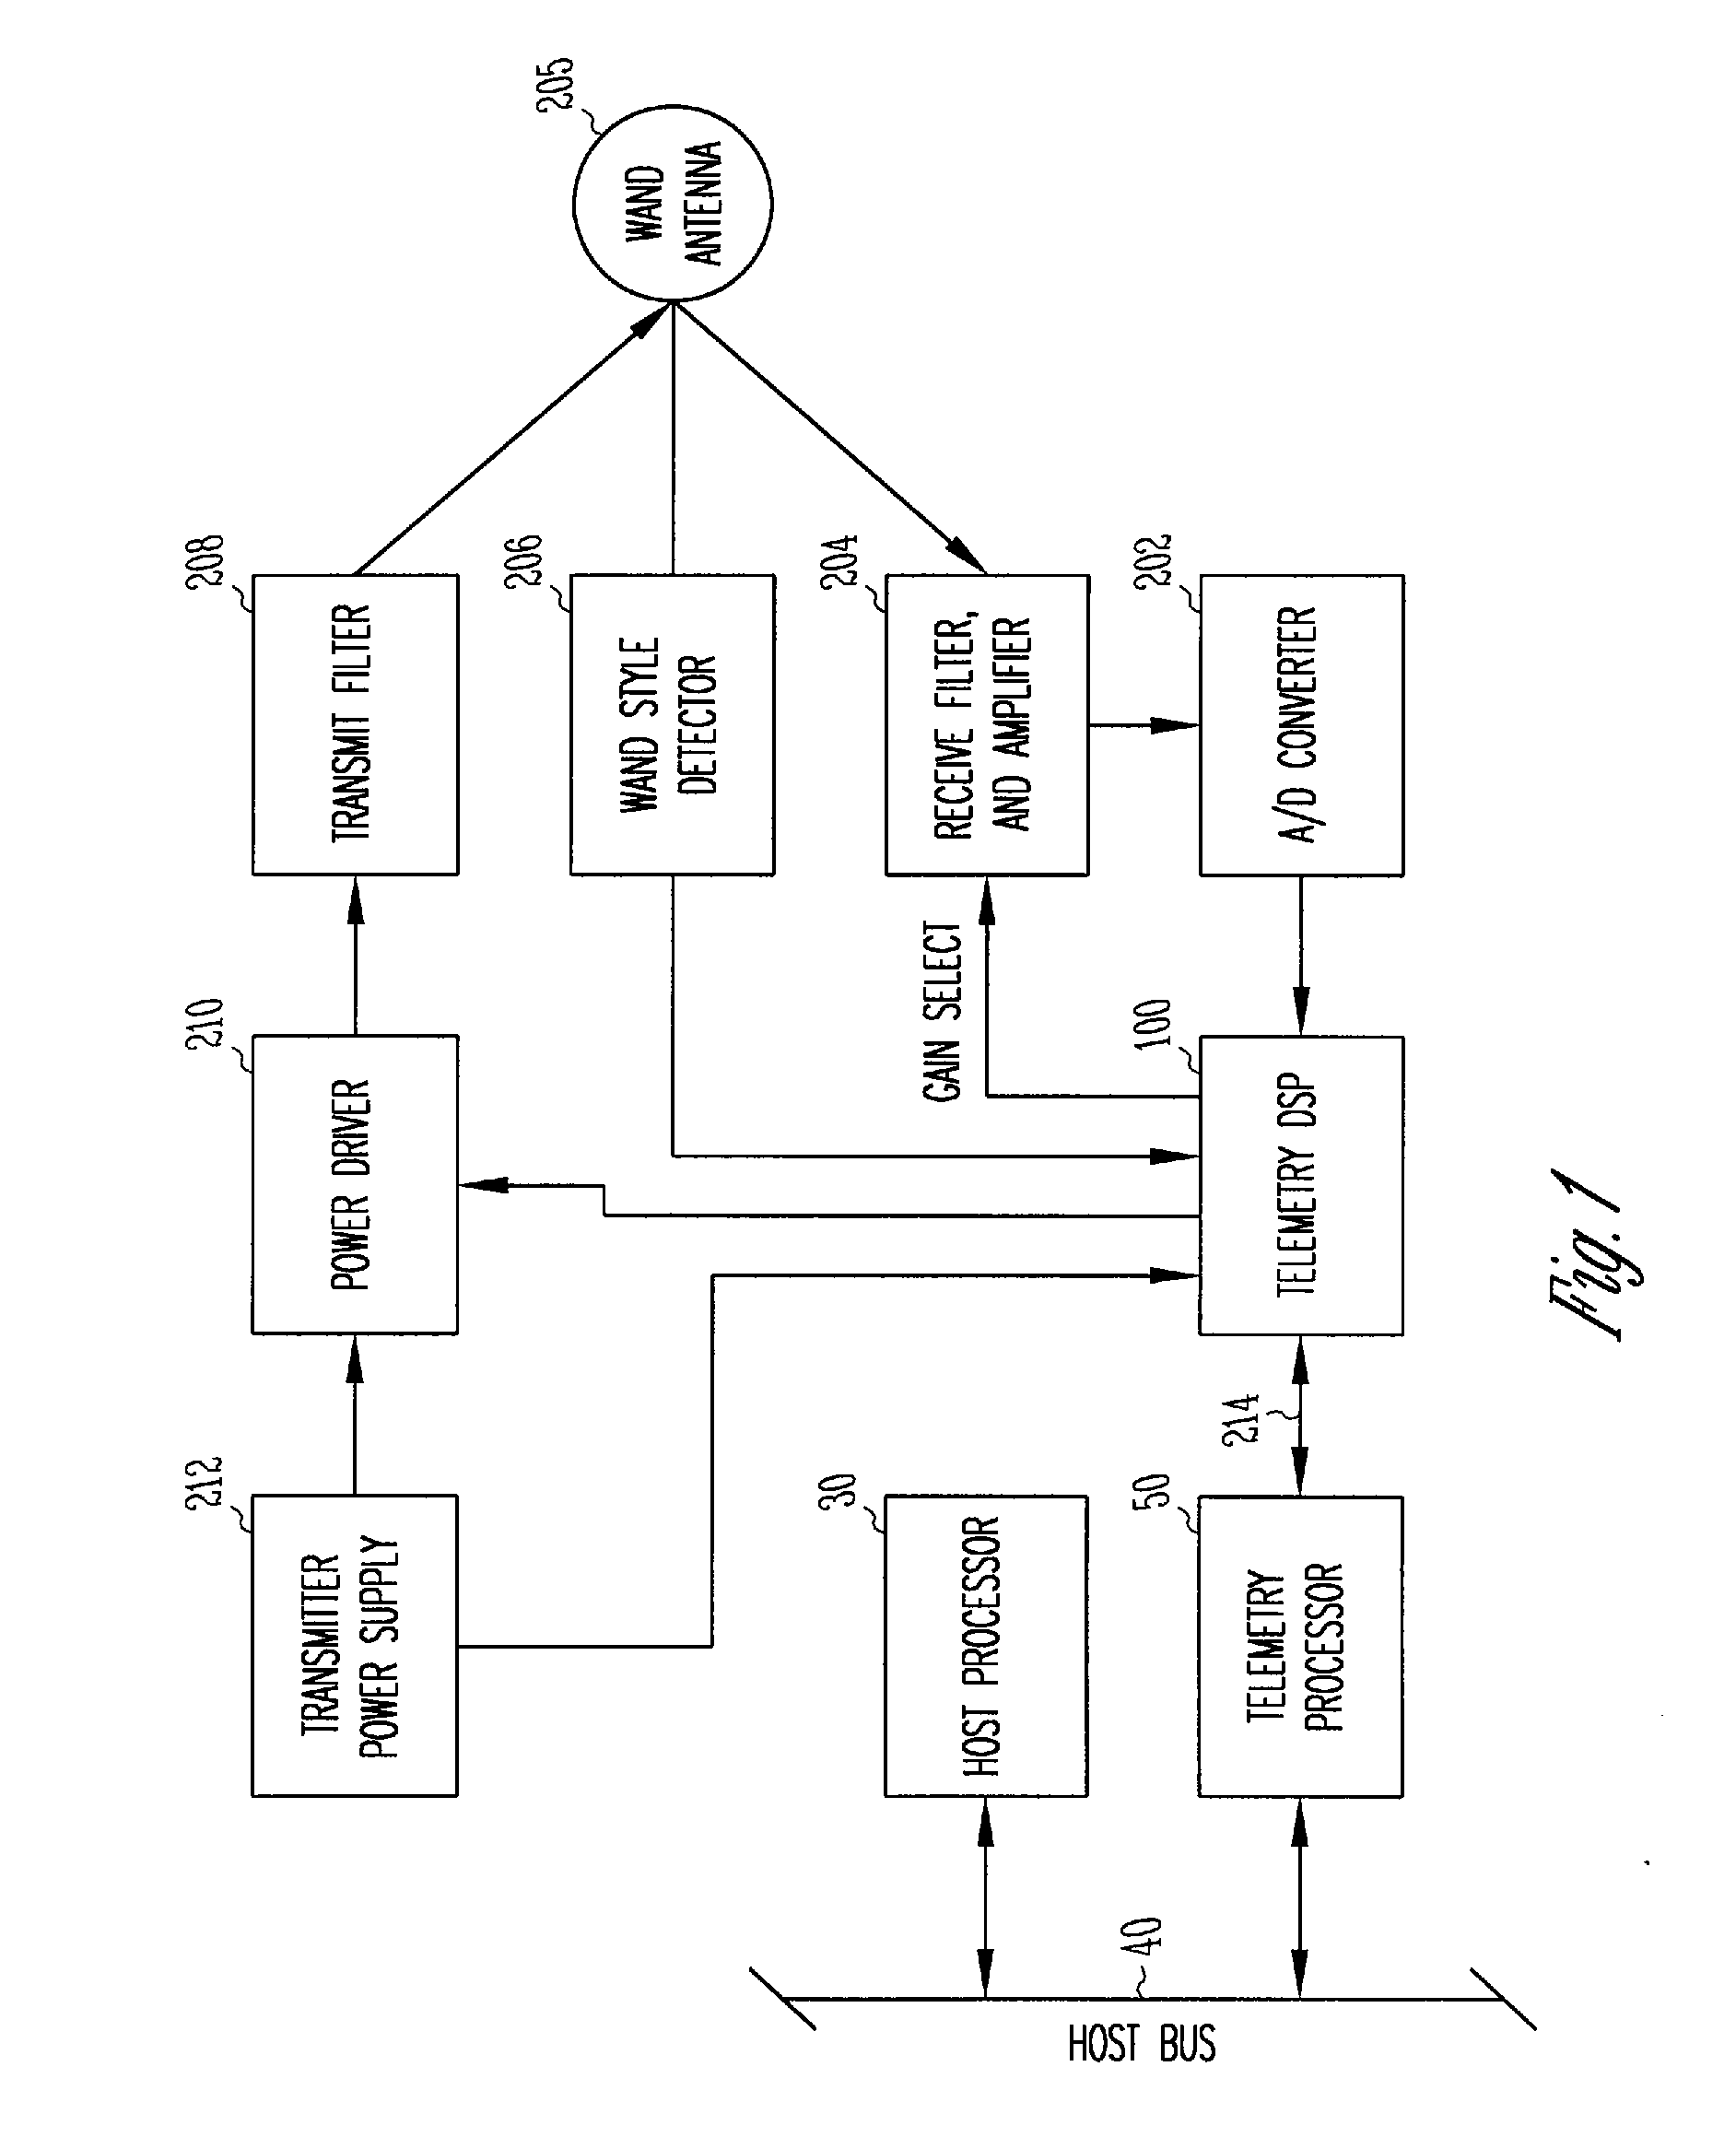 System and method for receiving telemetry data from an implantable medical device